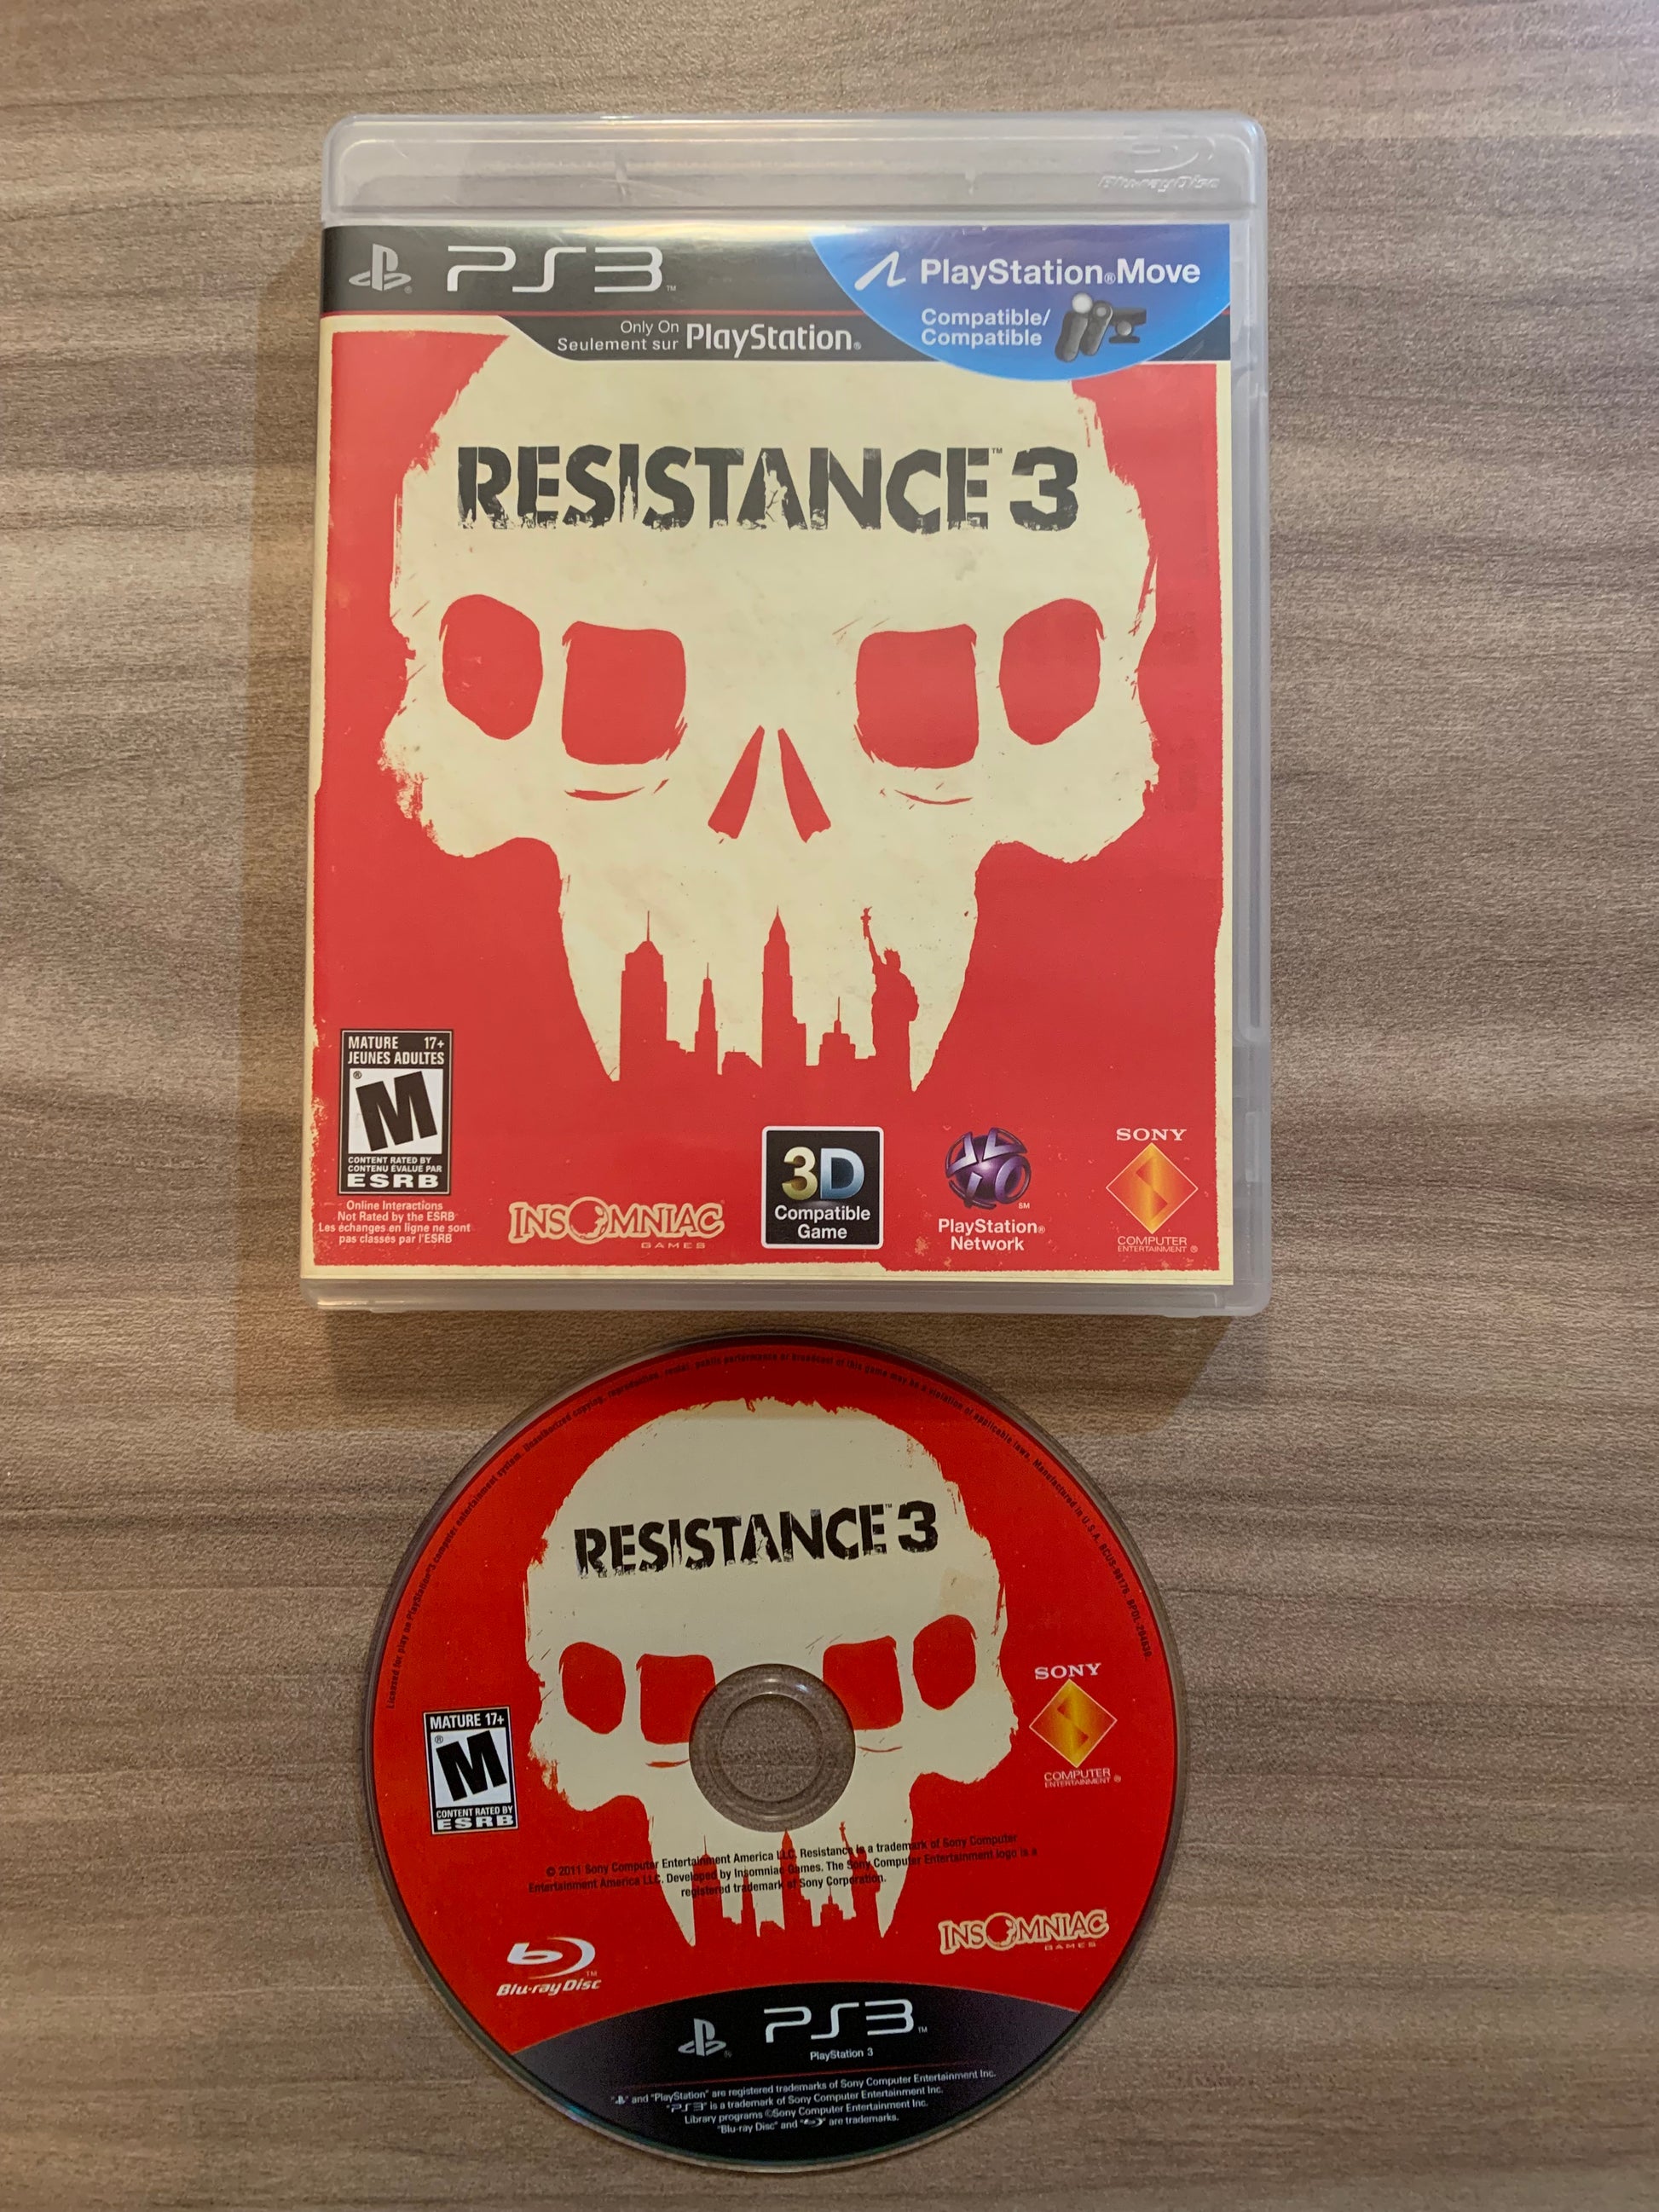 PiXEL-RETRO.COM : SONY PLAYSTATION 3 (PS3) COMPLETE IN BOX CIB MANUAL GAME NTSC RESISTANCE 3